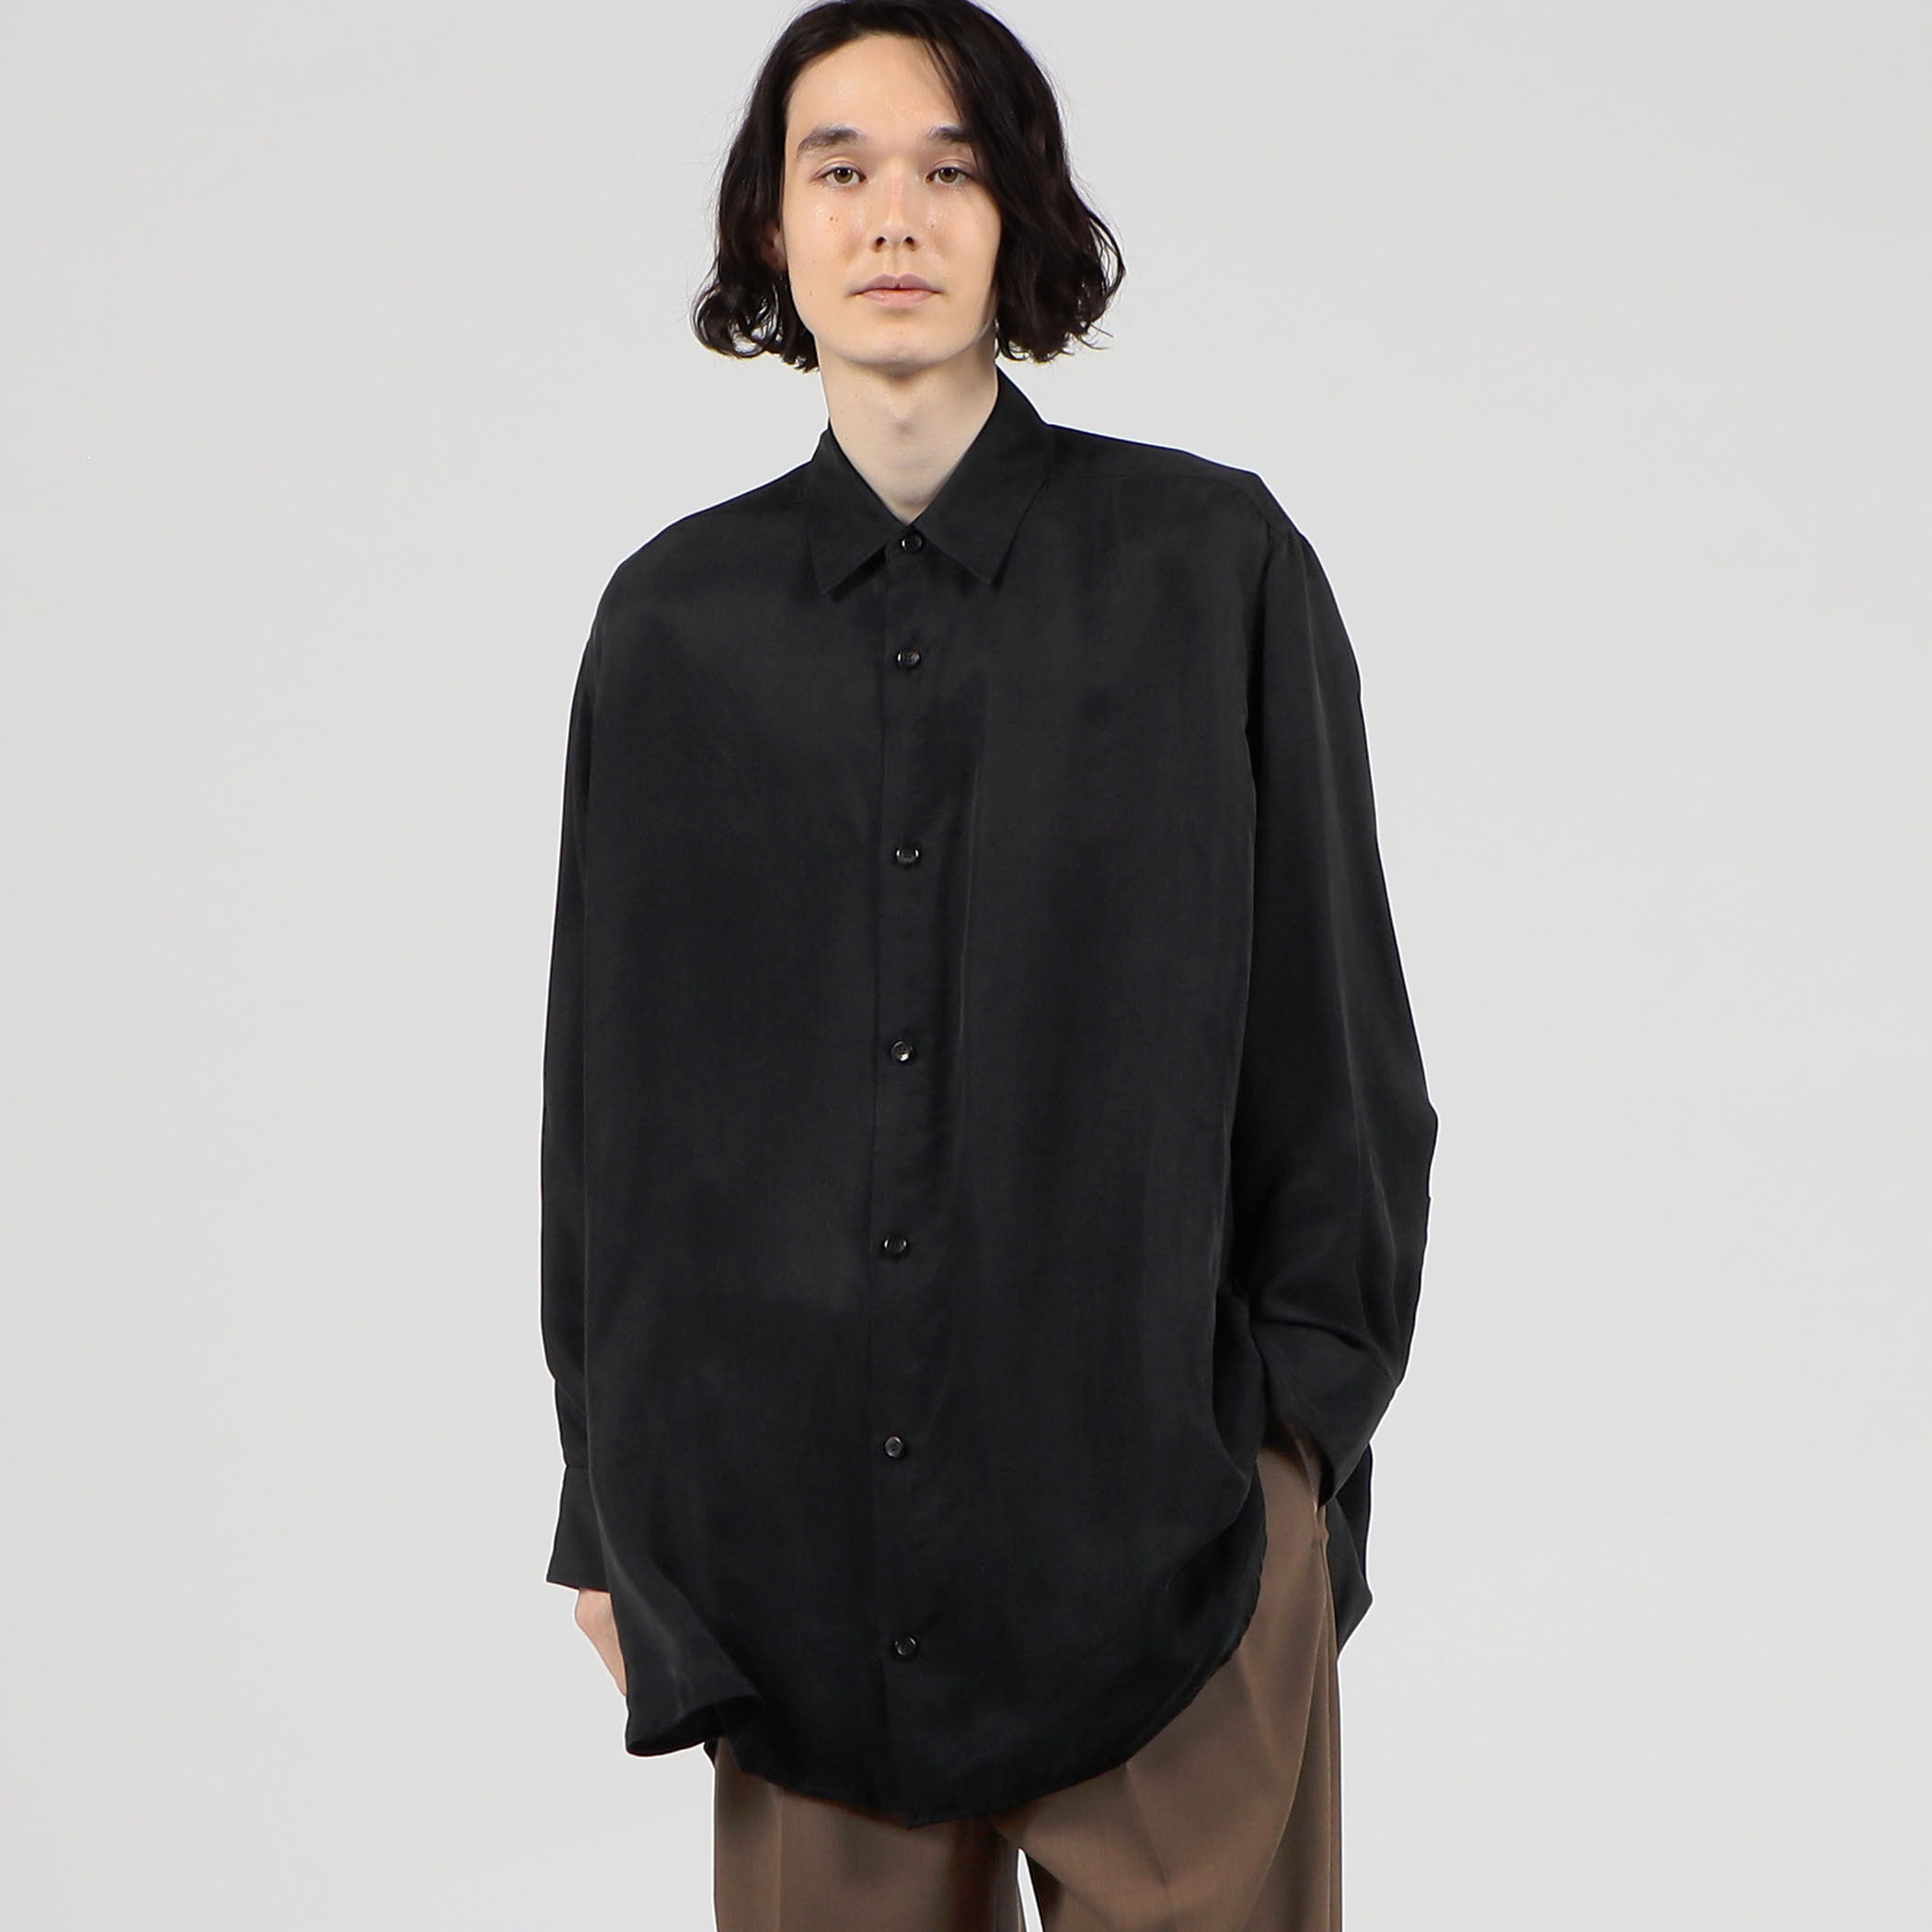 th products Oversized Shirt シャツ｜トゥモローランド 公式通販